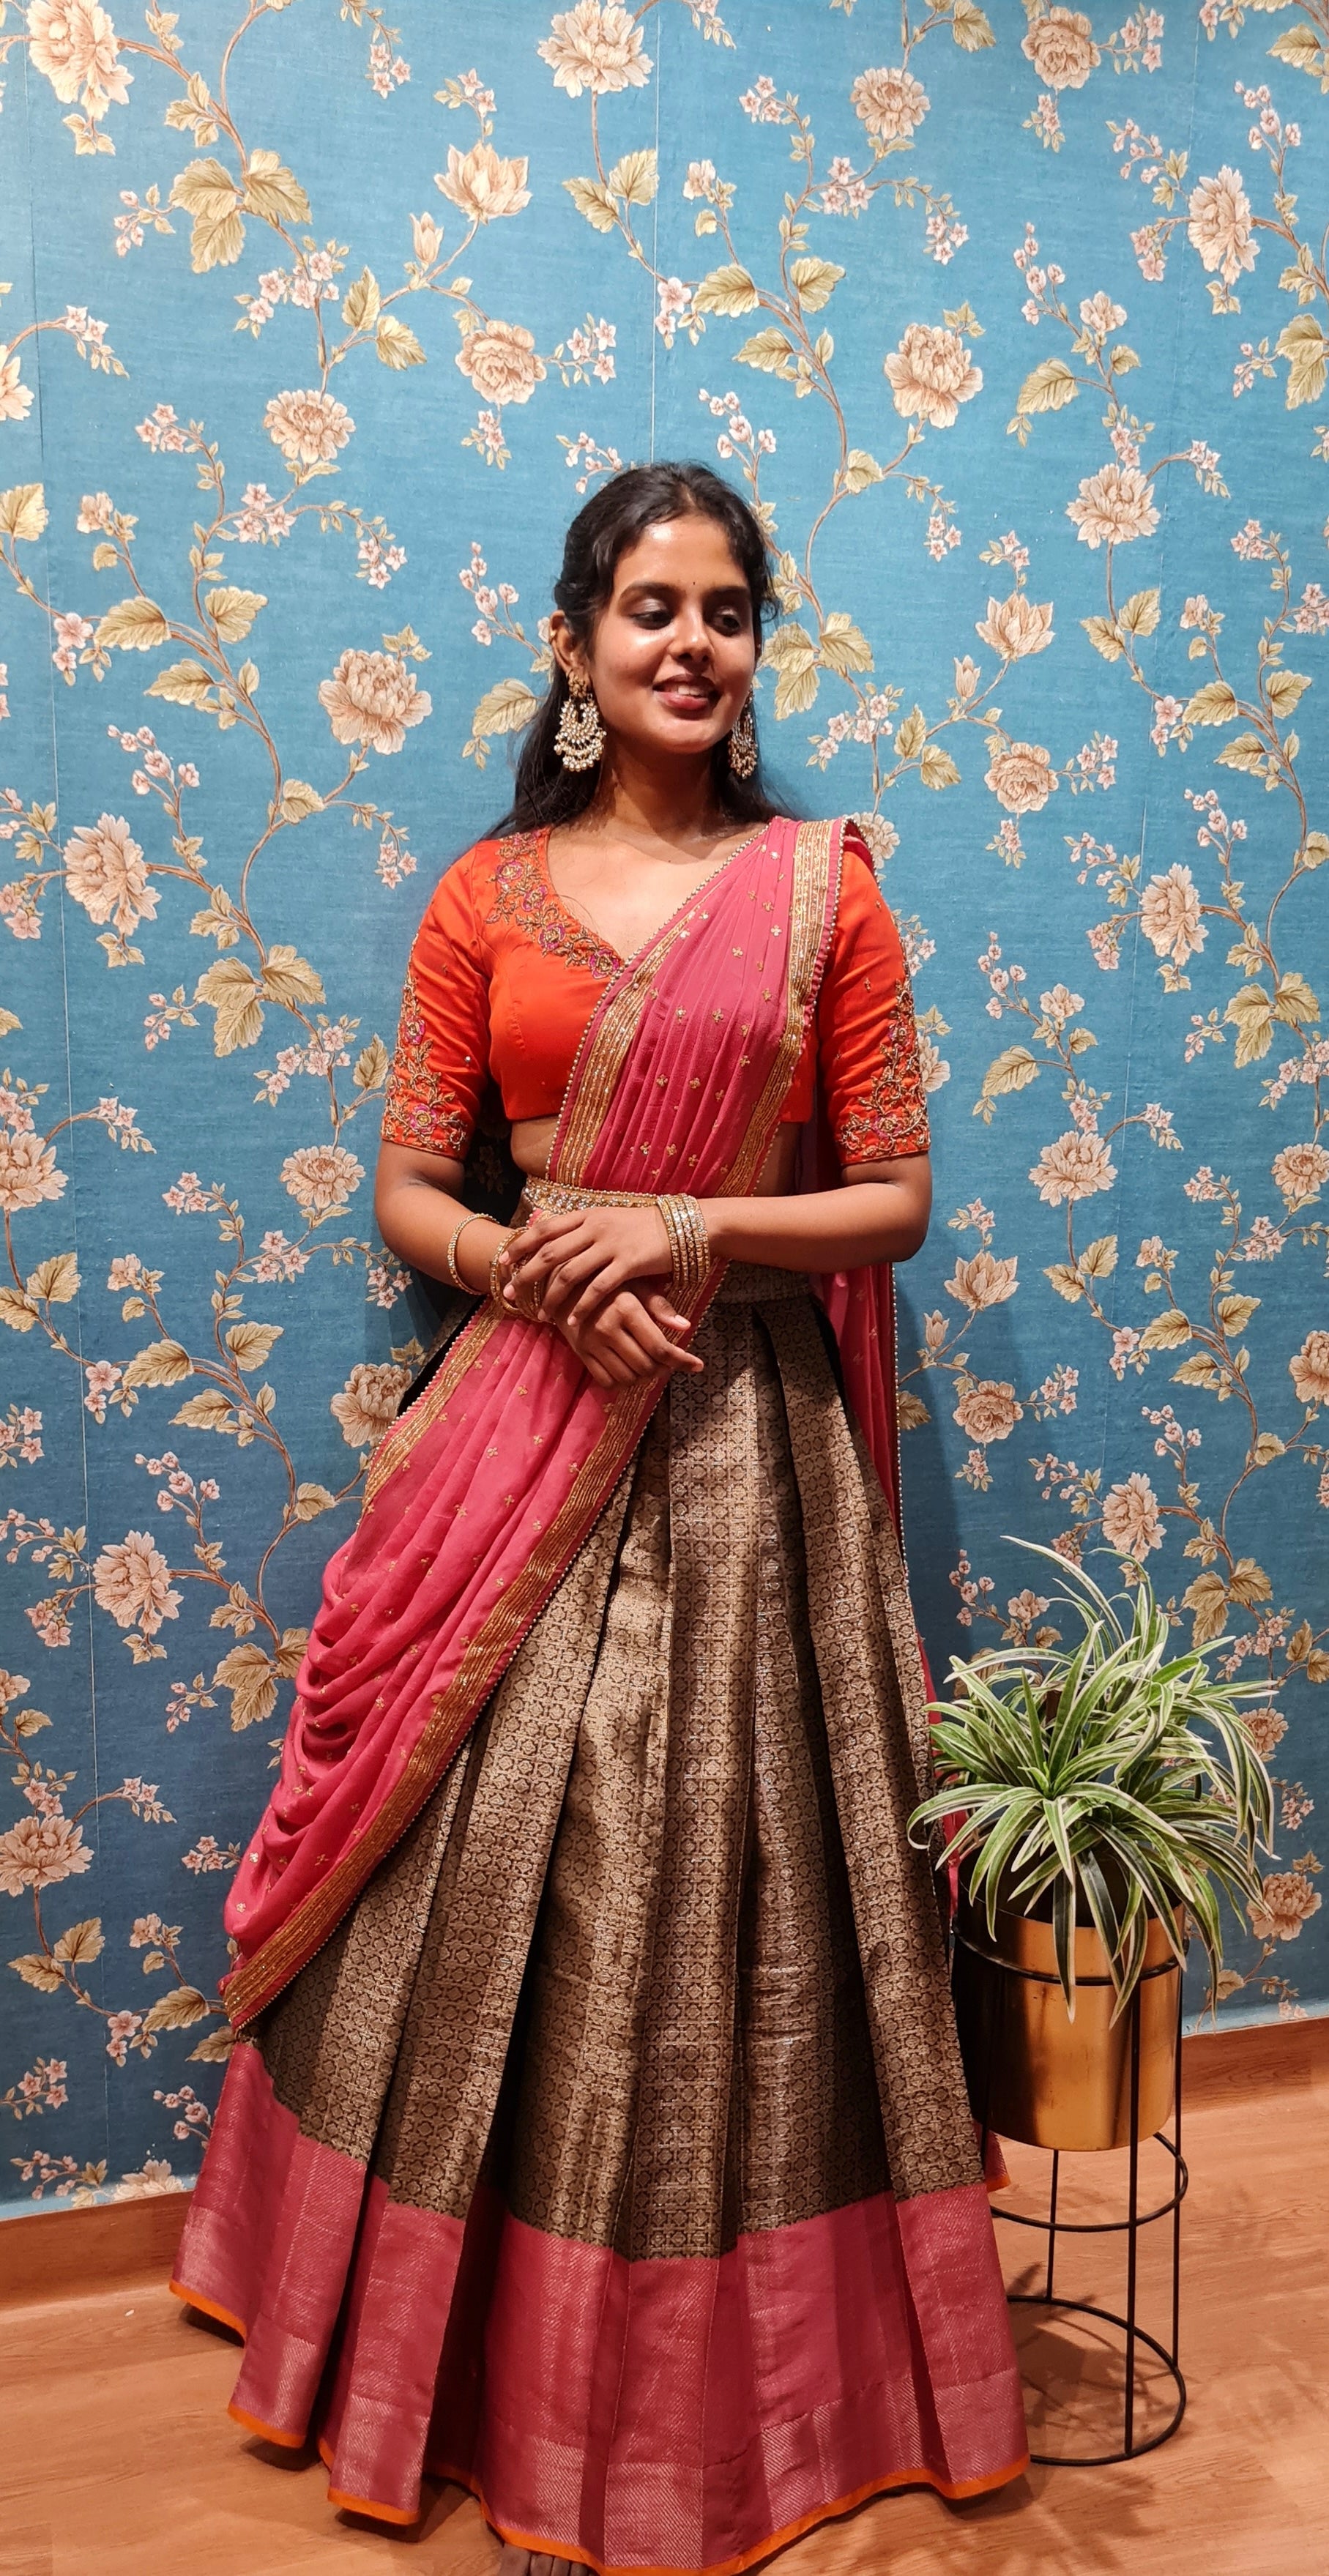 In a pink color saree, elbow length sleeve blouse design and hip